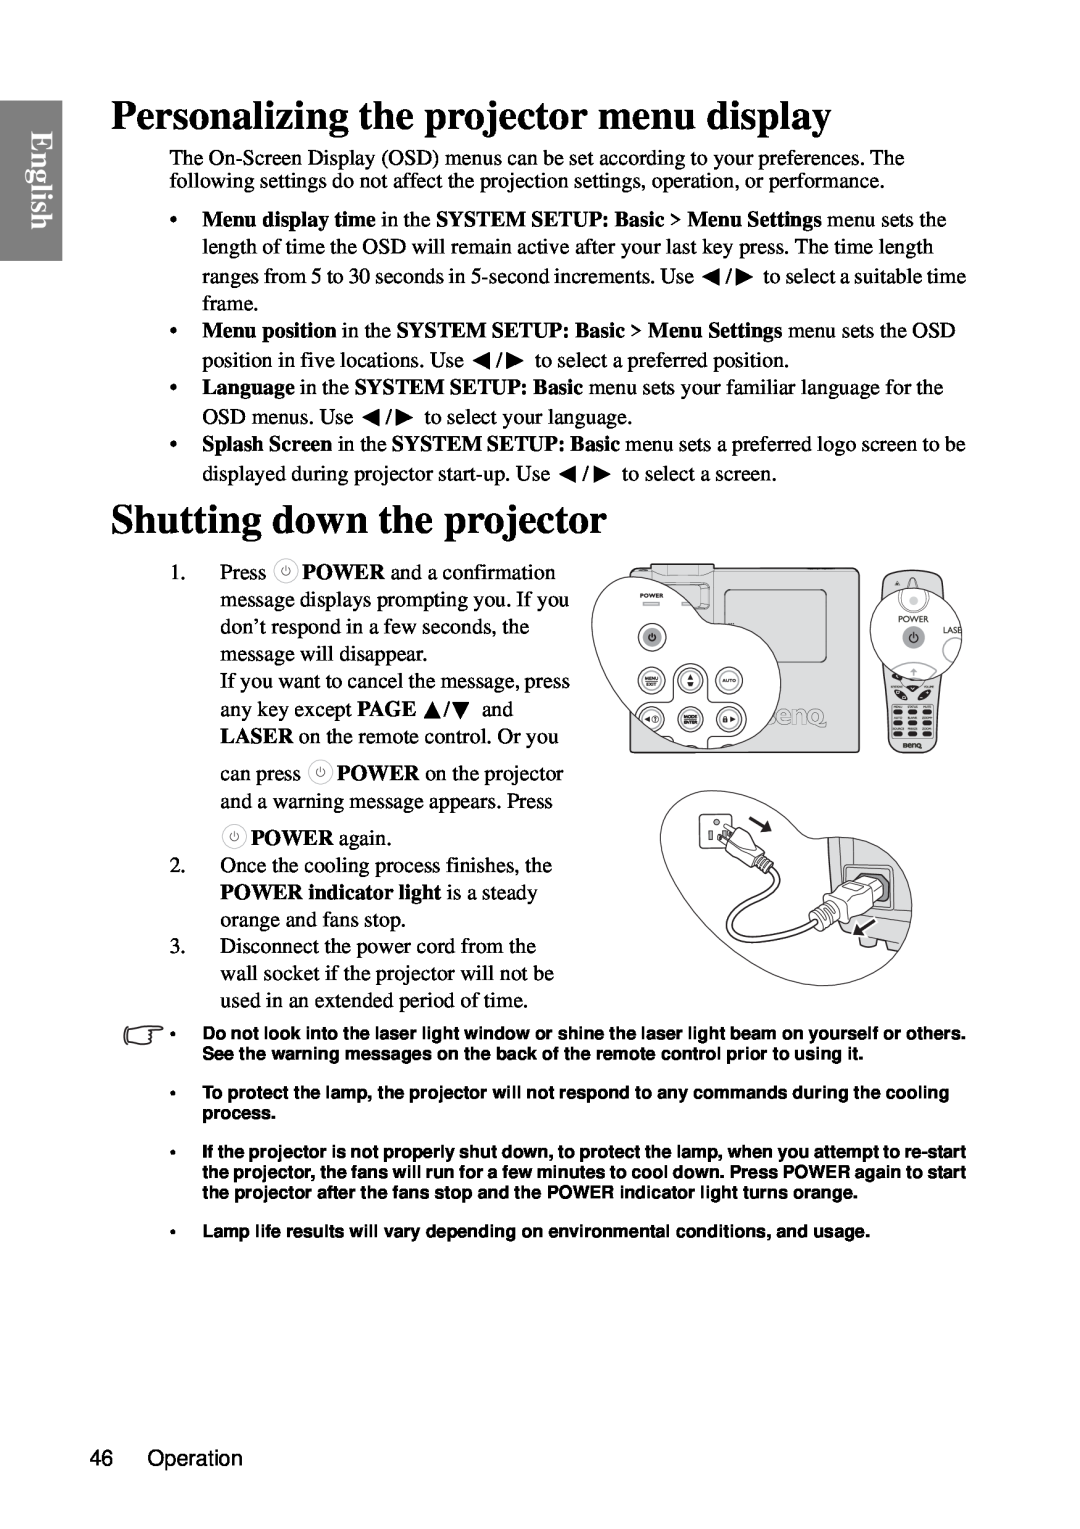 BenQ SP840 user manual Personalizing the projector menu display, Shutting down the projector, English 